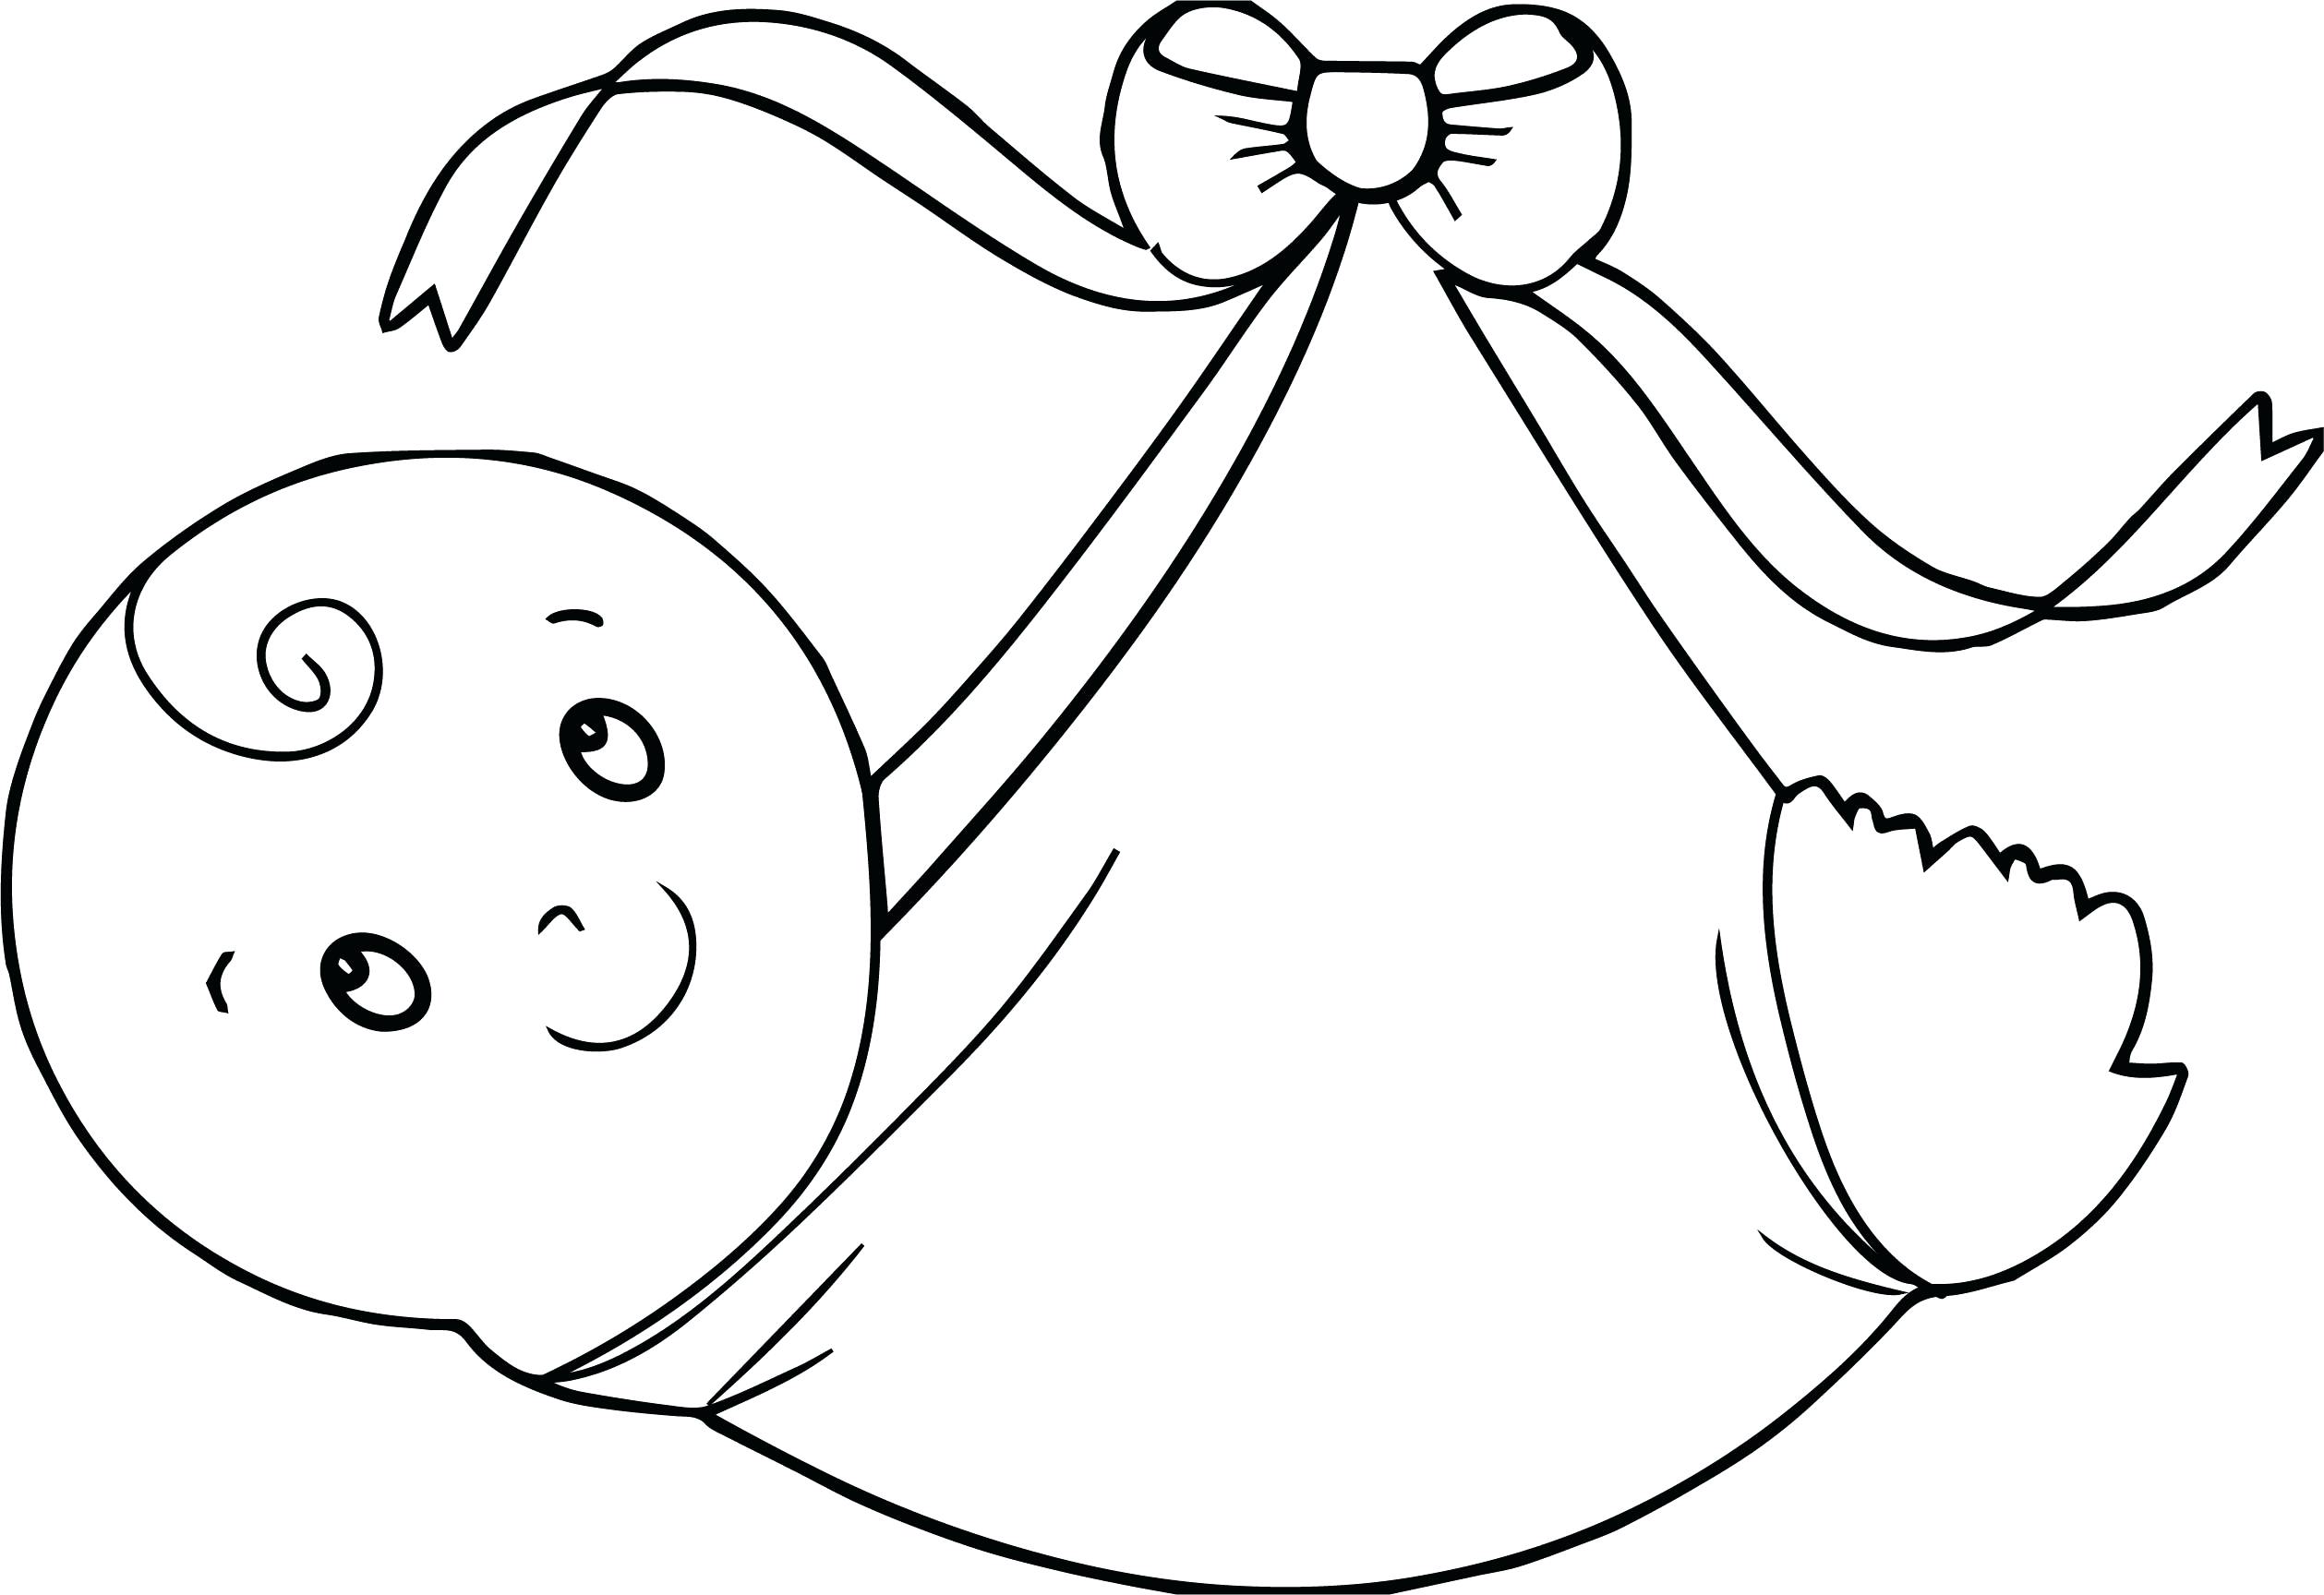 Baby Clothes Coloring Pages at GetColorings.com | Free printable